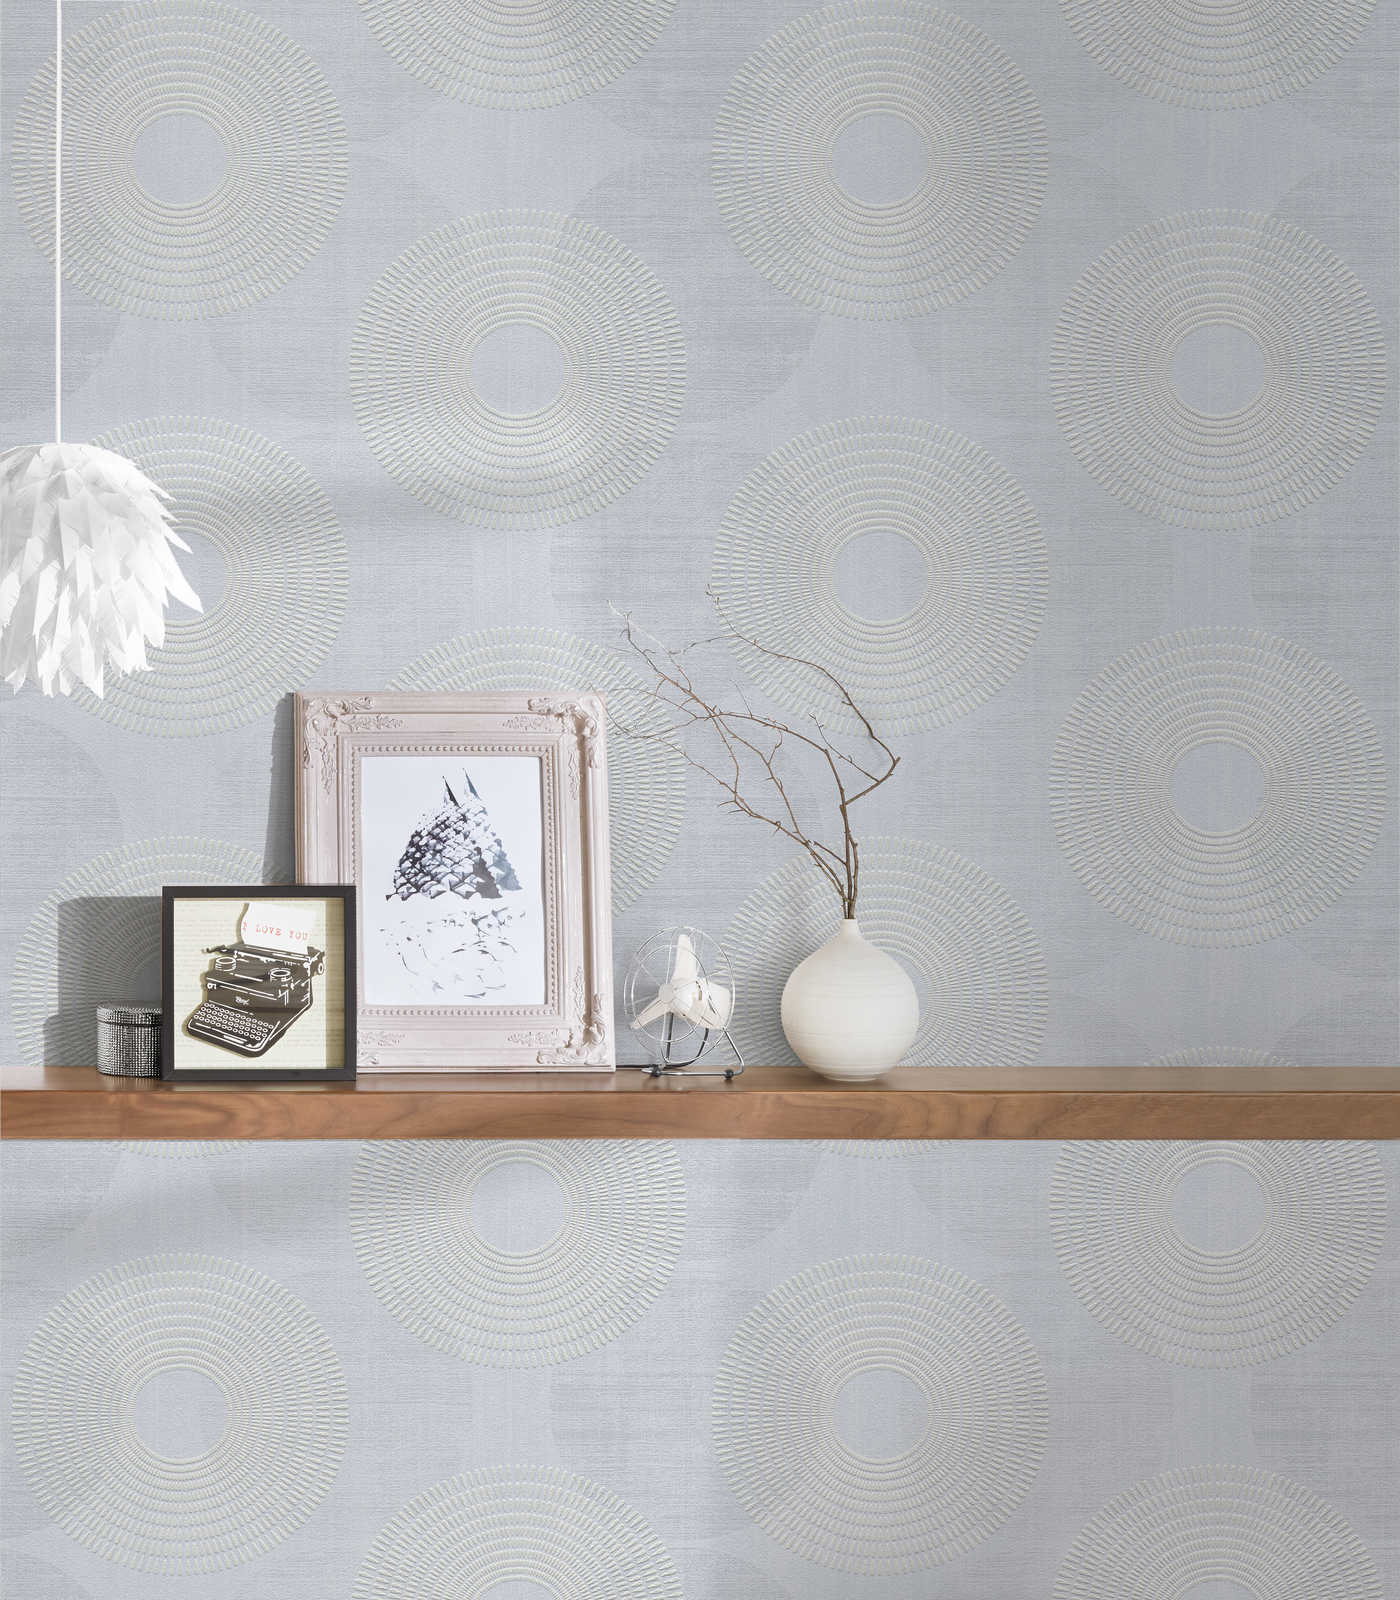             Non-woven wallpaper with geometric design of circles - grey
        